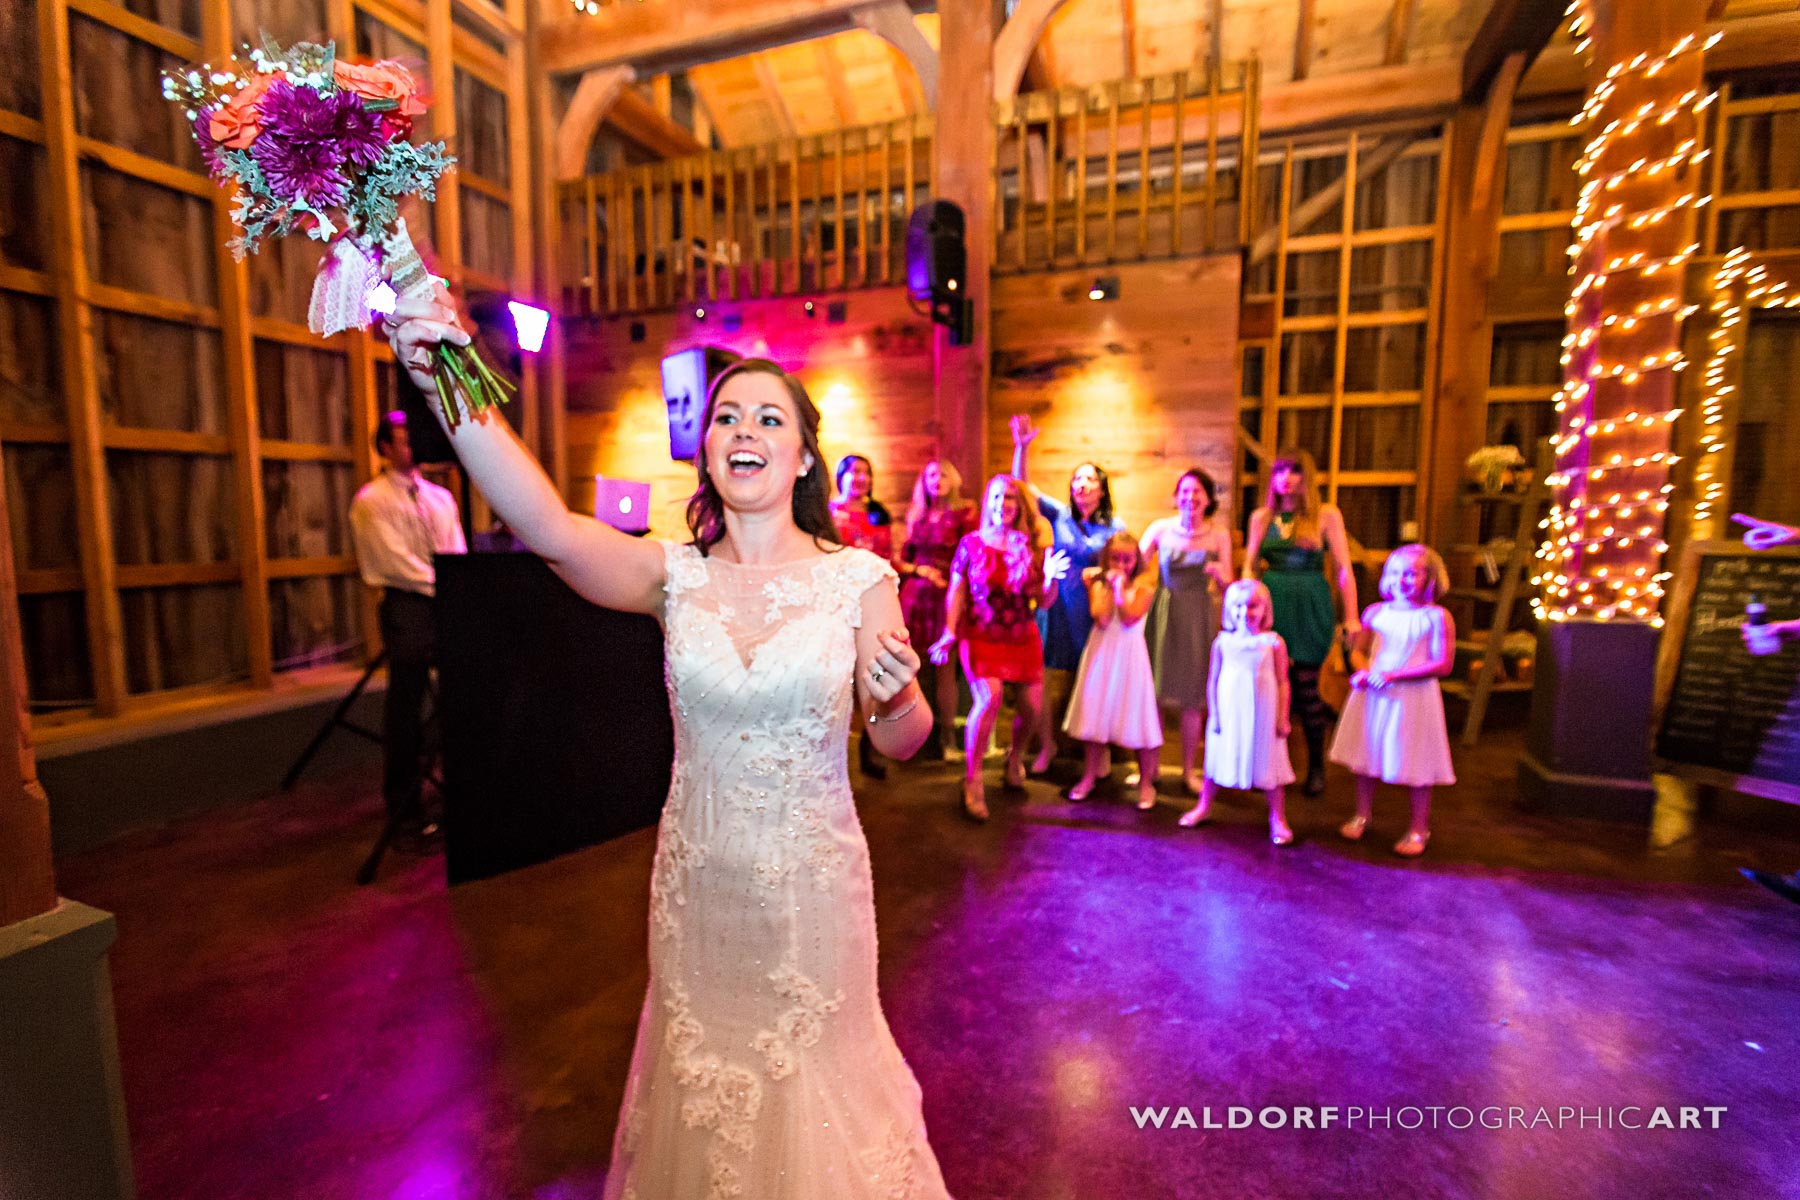 Throwing the bouquet in the barn from above at Pure Water Farm barn wedding near Gatlinburg.